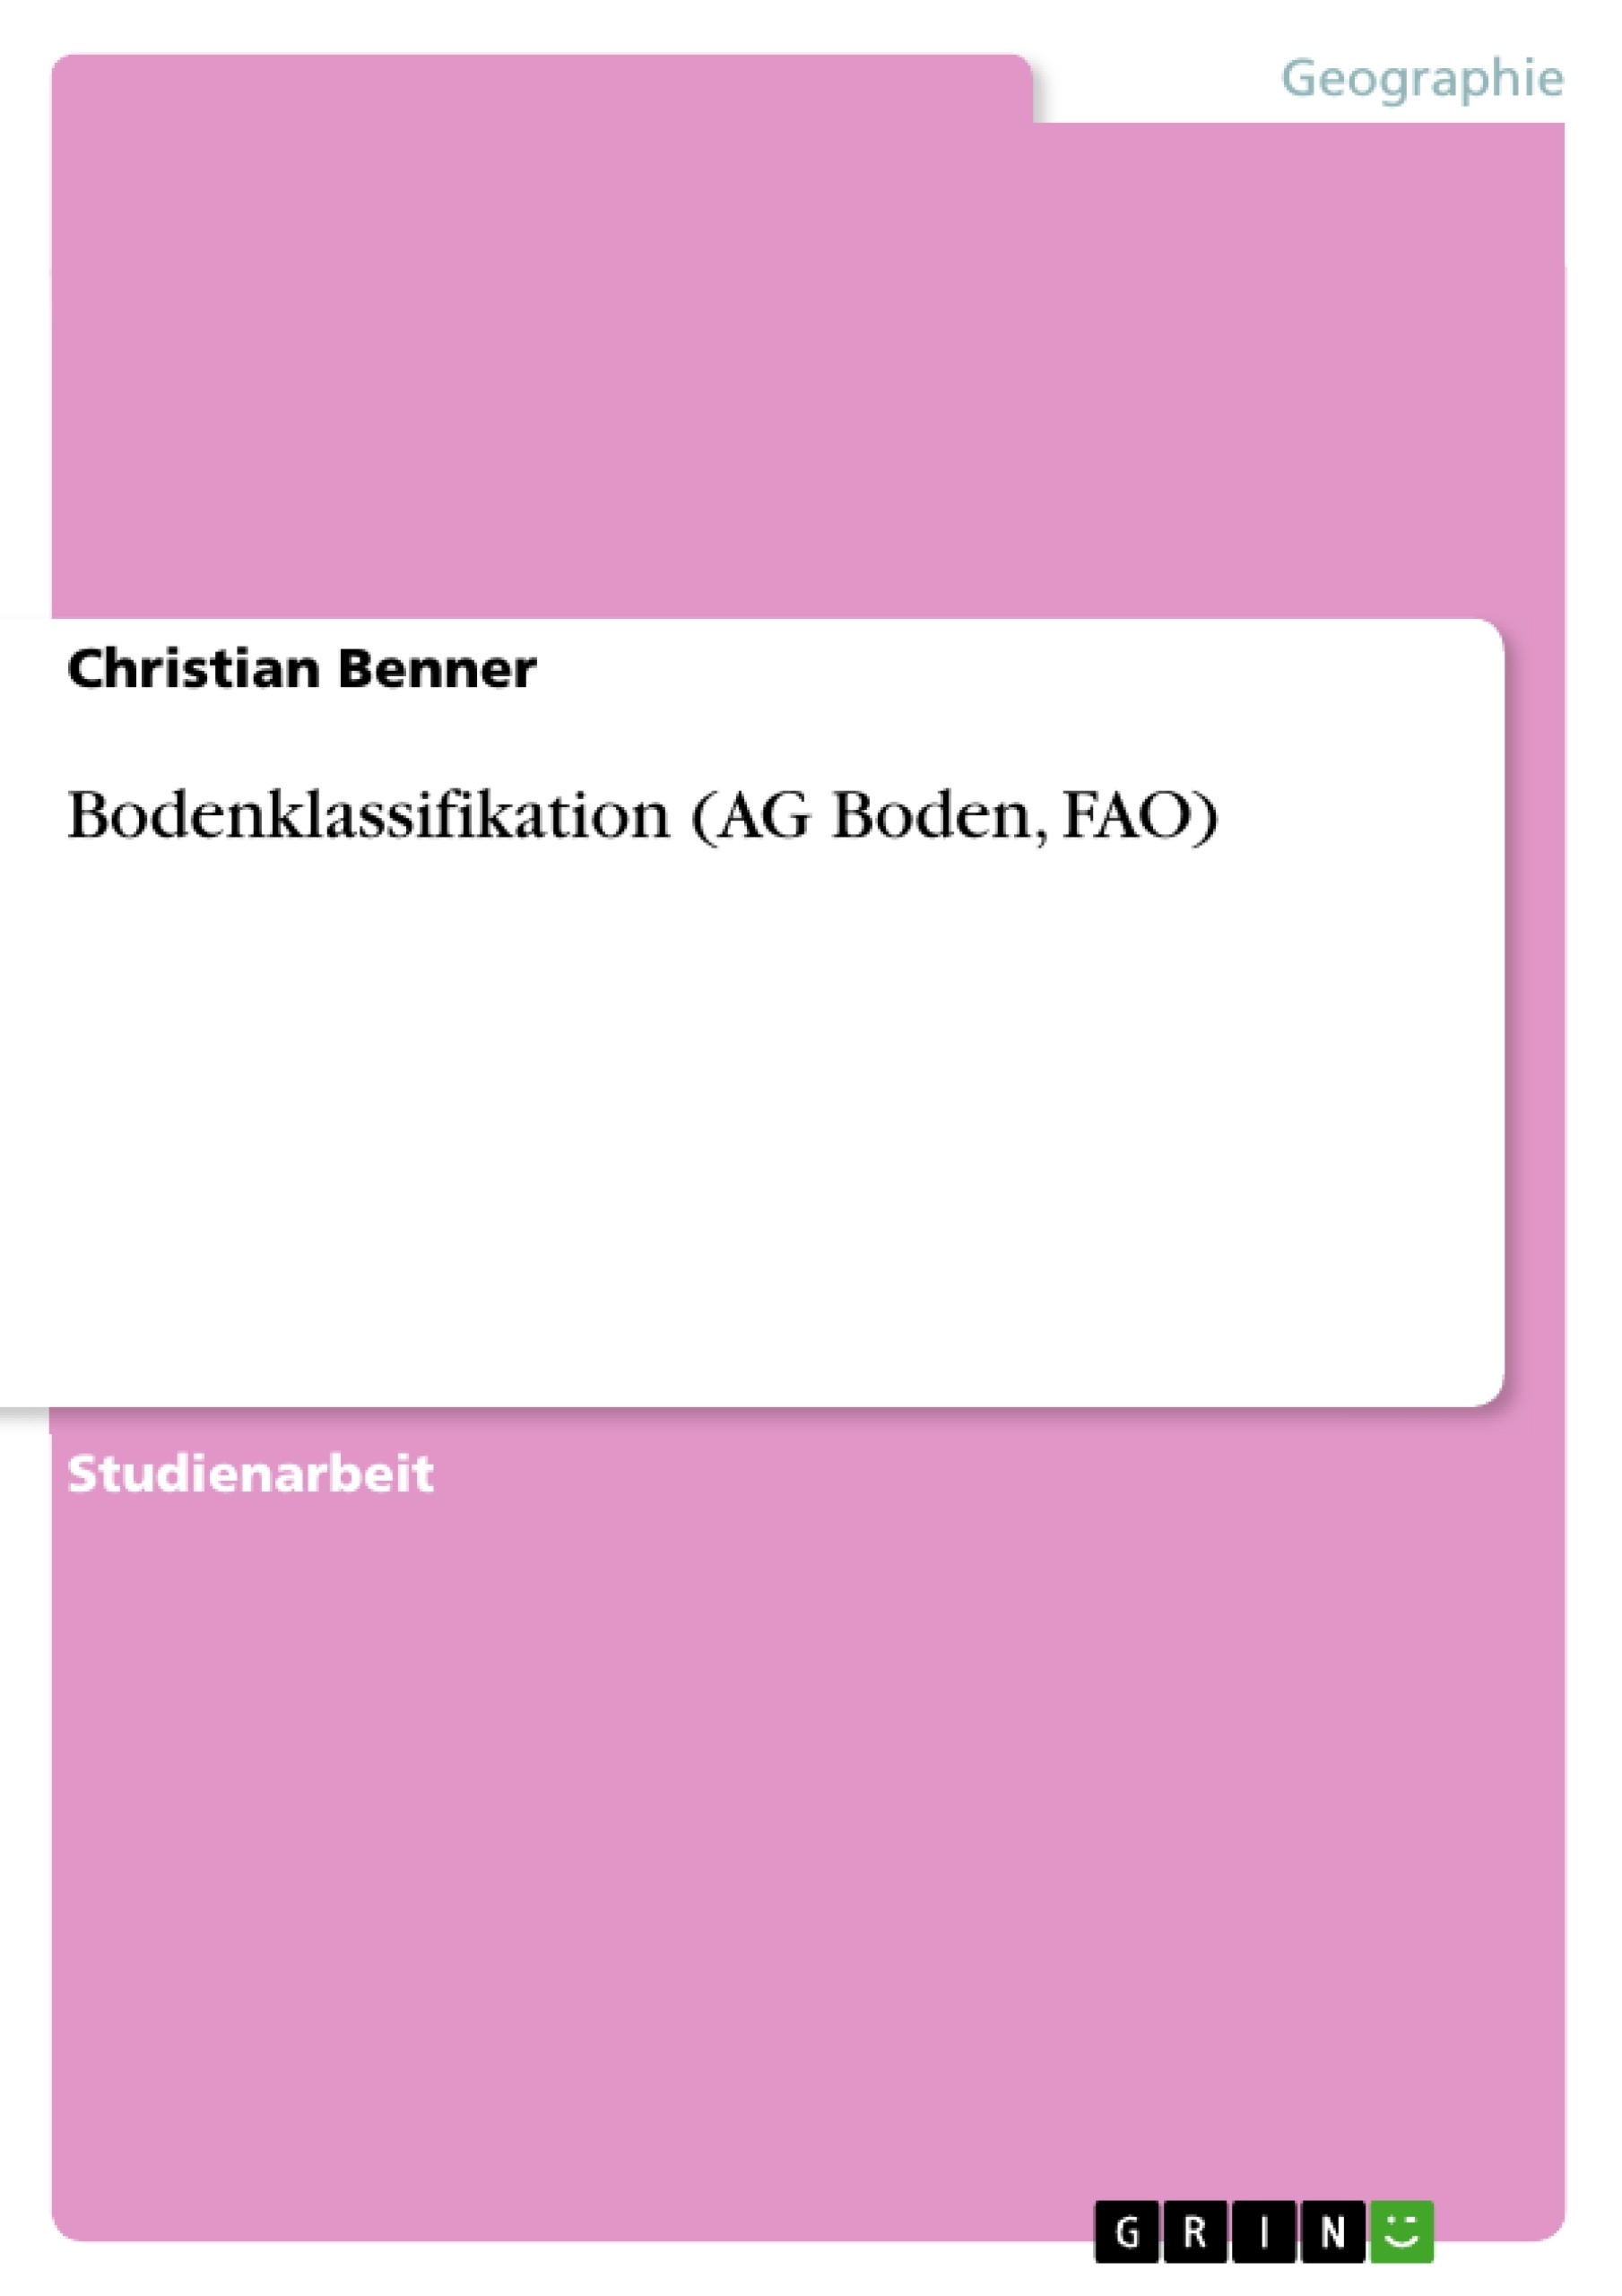 Title: Bodenklassifikation (AG Boden, FAO)